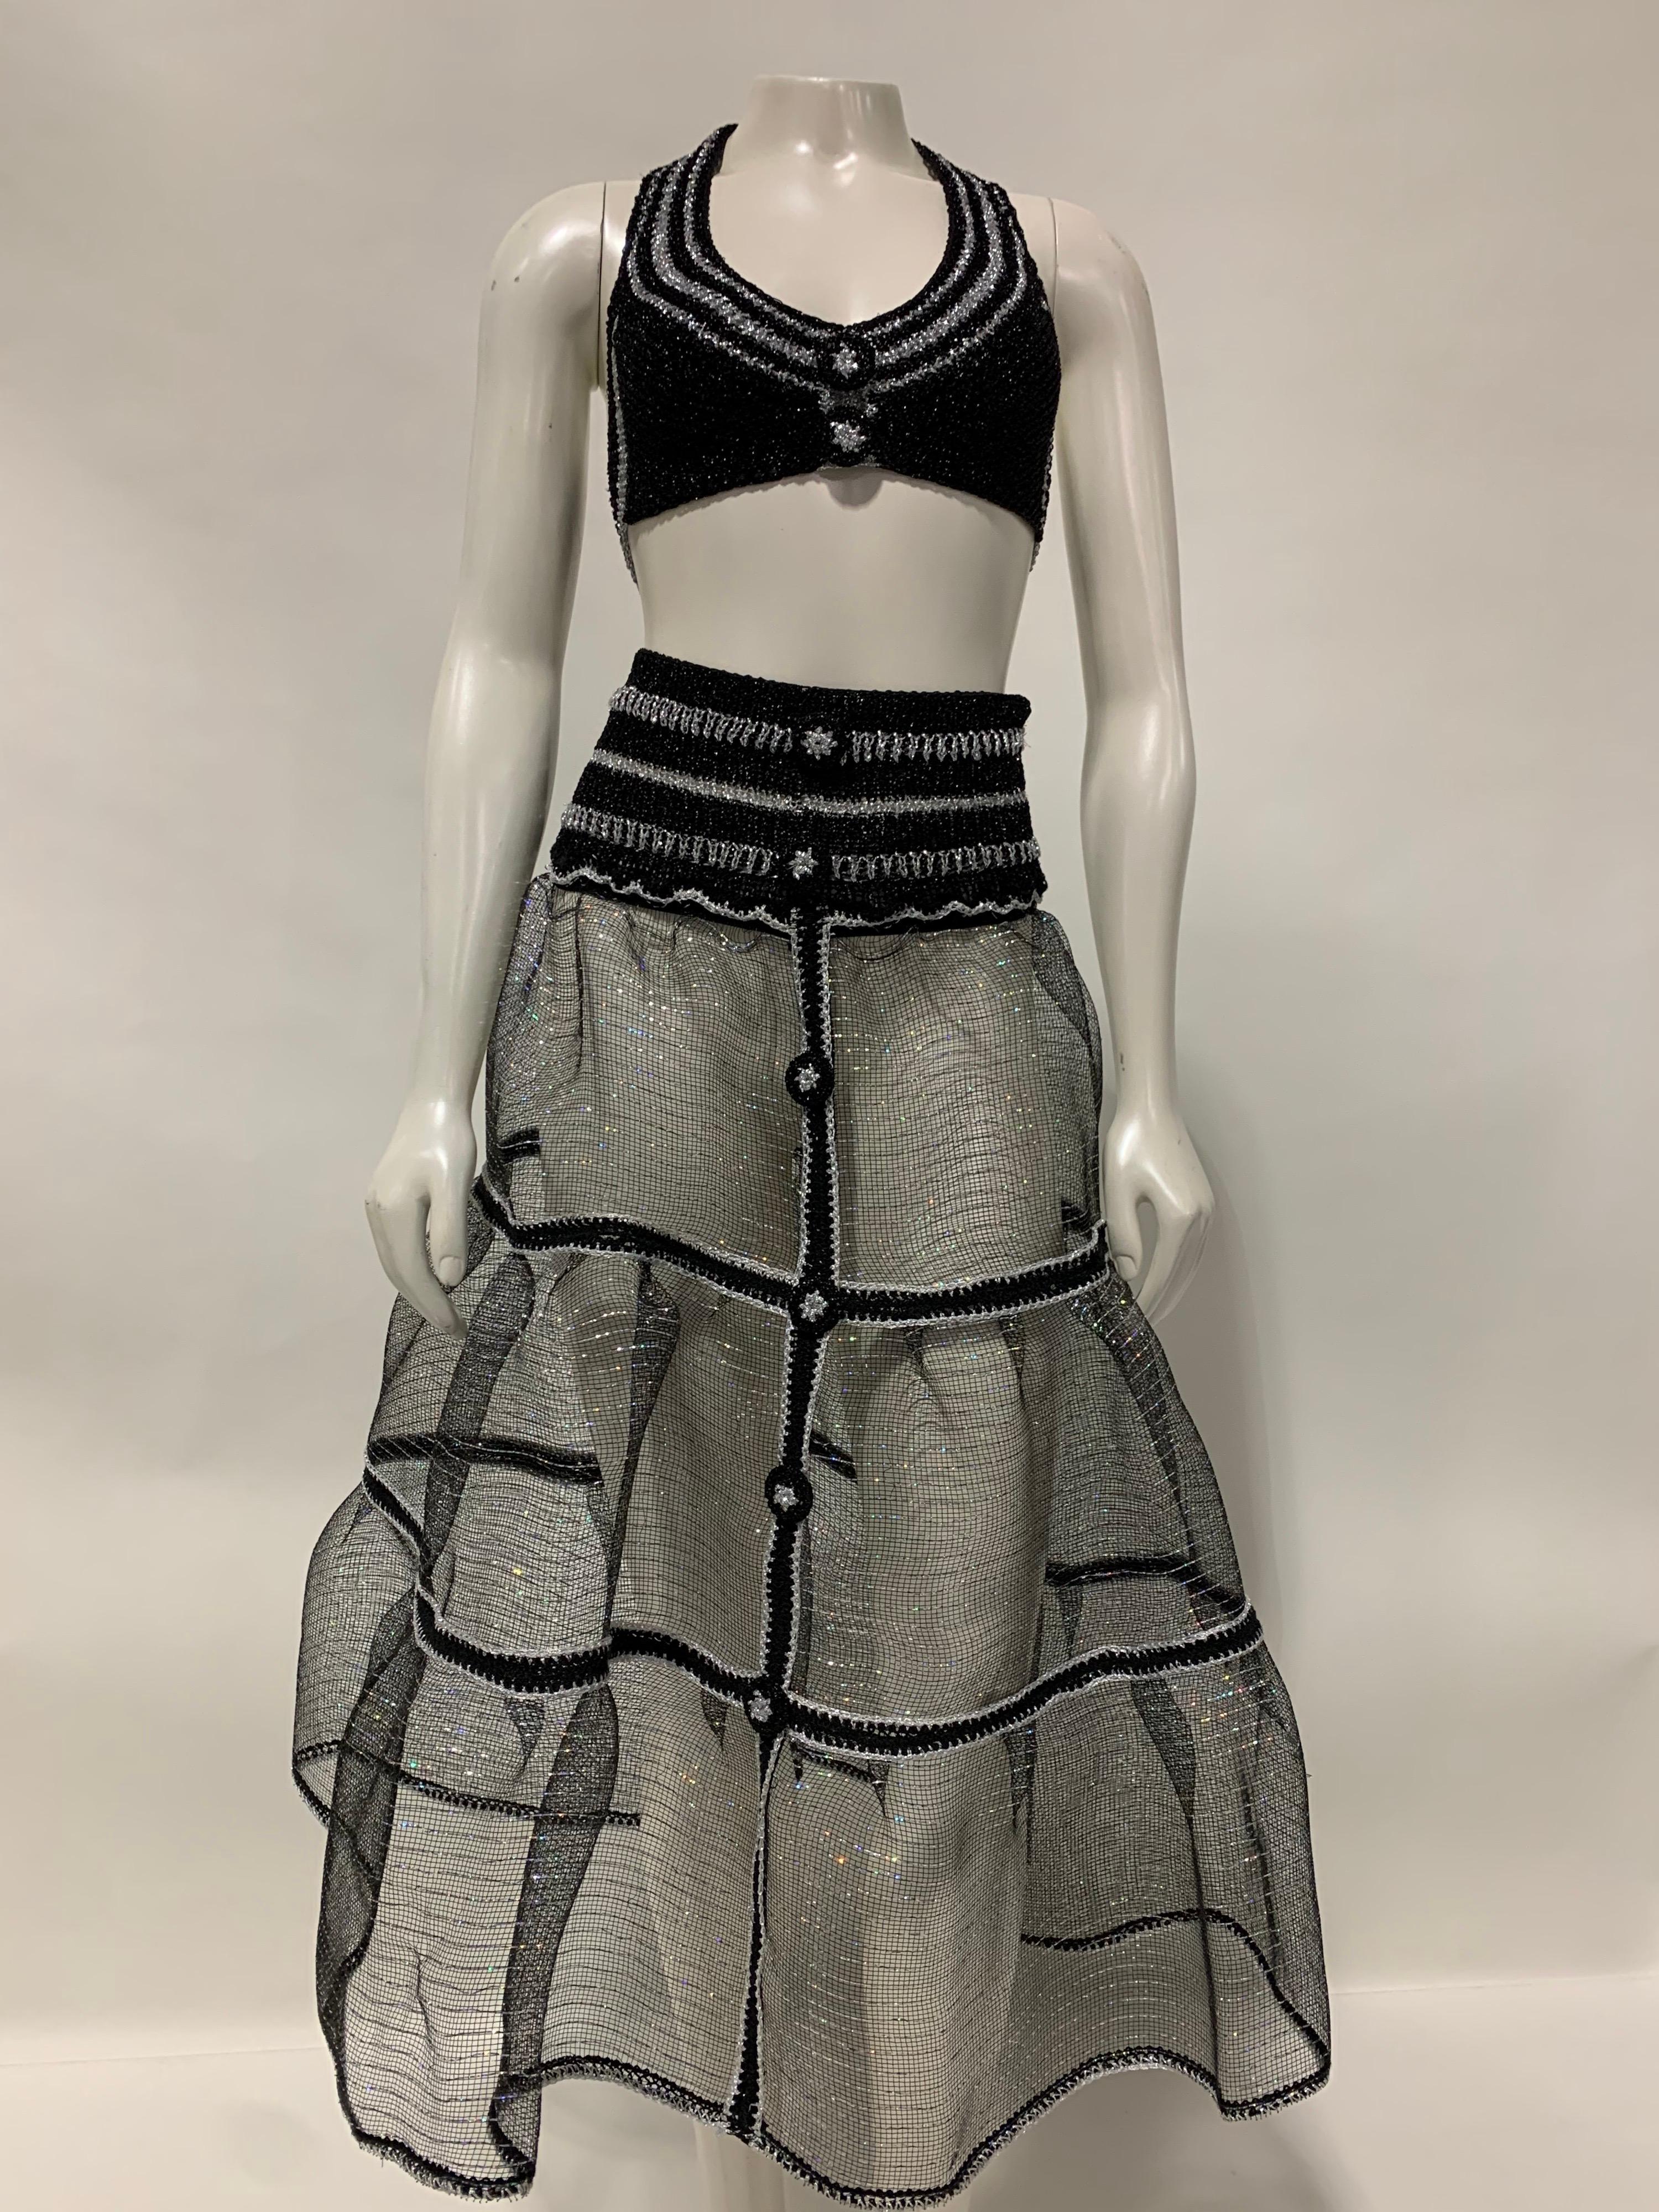 Torso Creations Black & Silver Lurex Knit Bralette & Horsehair Crinoline Set. Hand-knit cutting-edge style in this custom design. One of a kind art to wear with buttons down front of both pieces. Fits size 4-6.